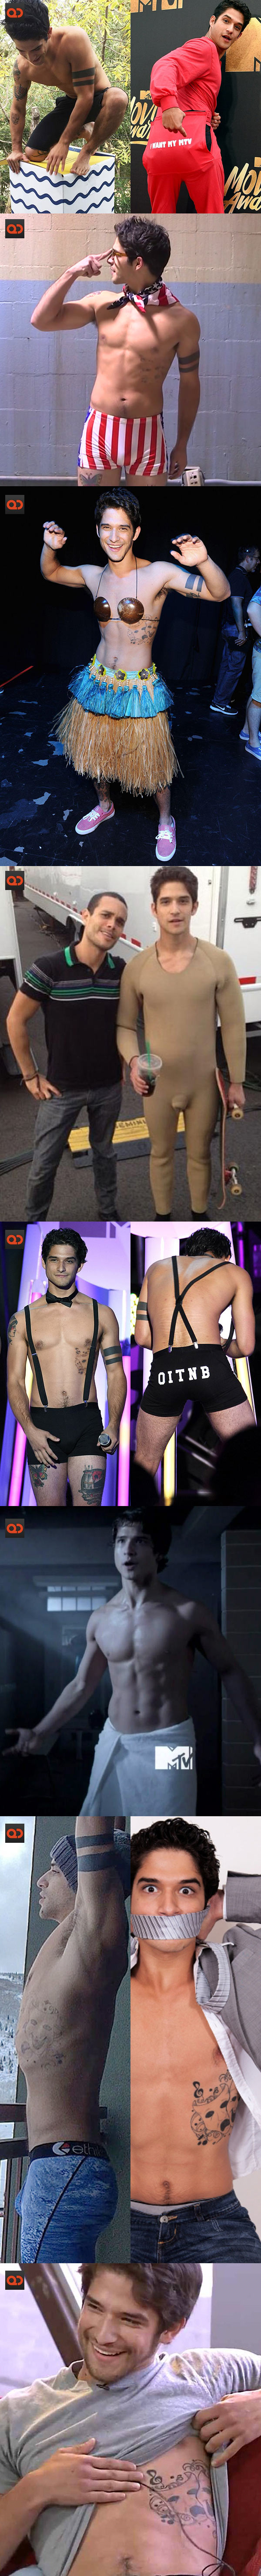 Tyler Posey Allegedly Caught Airing His “Teen Wolf” Cock!